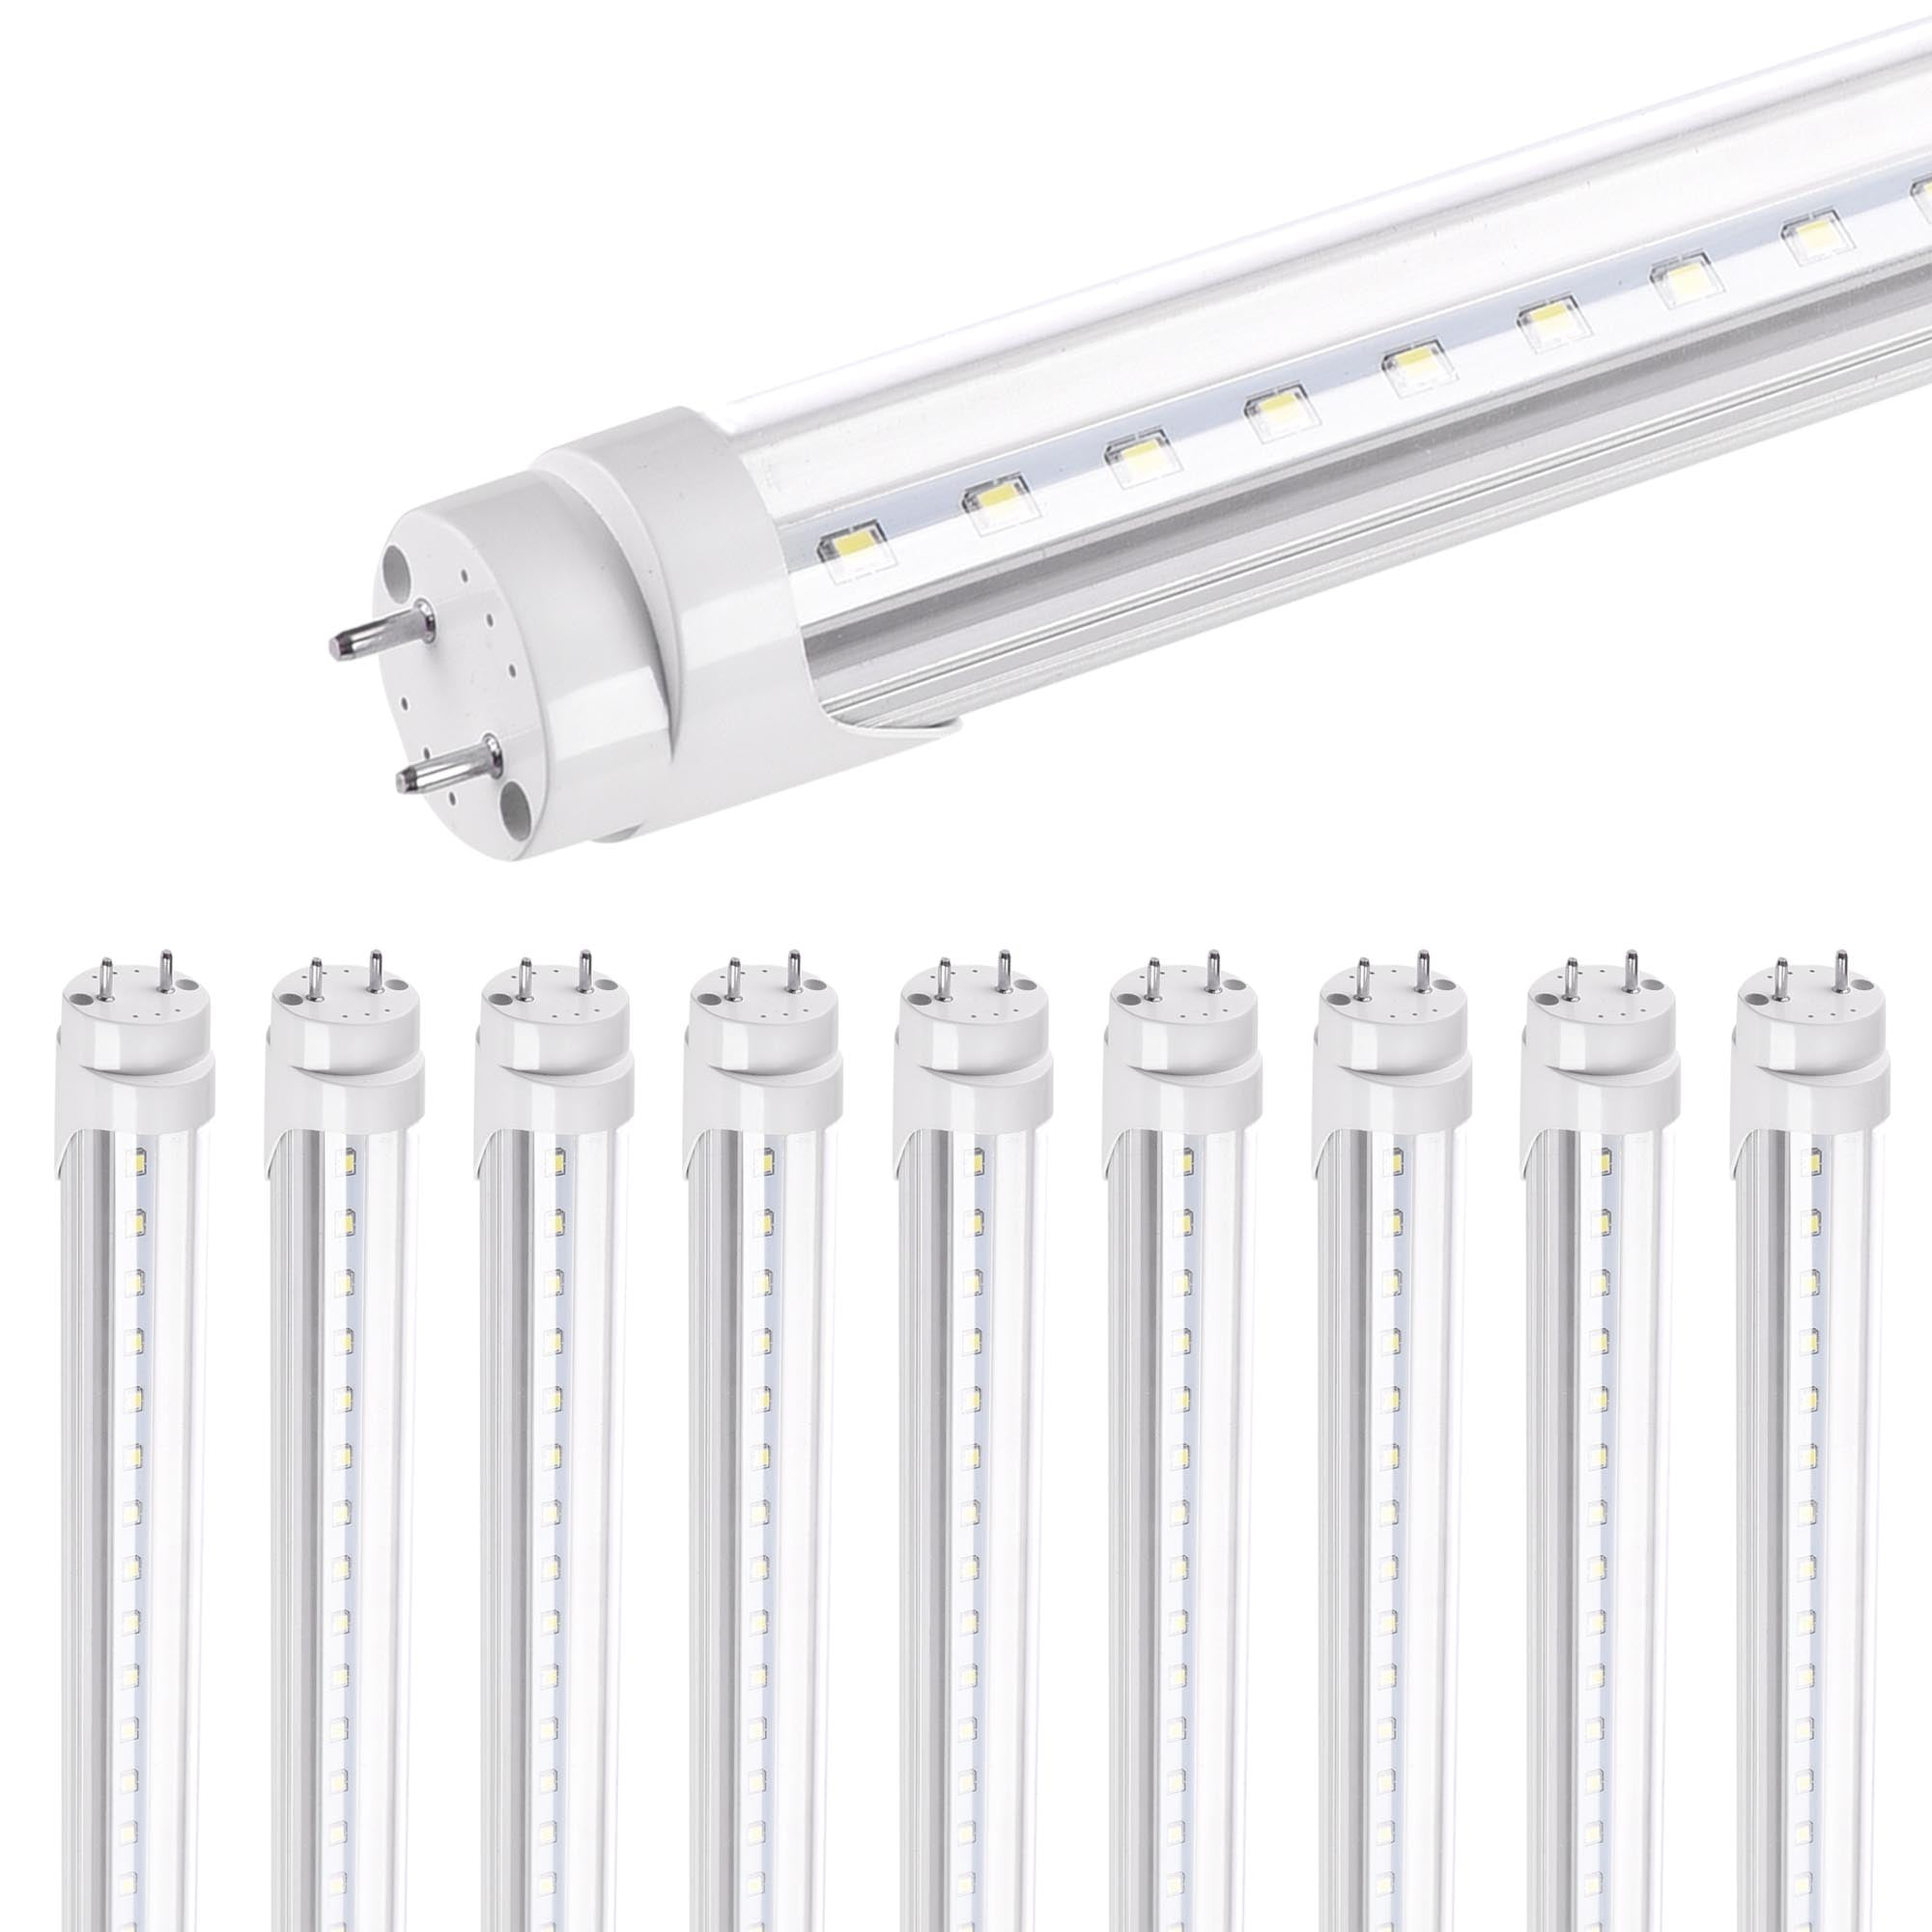 5 x LED T8 Tube 5ft Retrofit Fluorescent Replacement Milky Cover White 